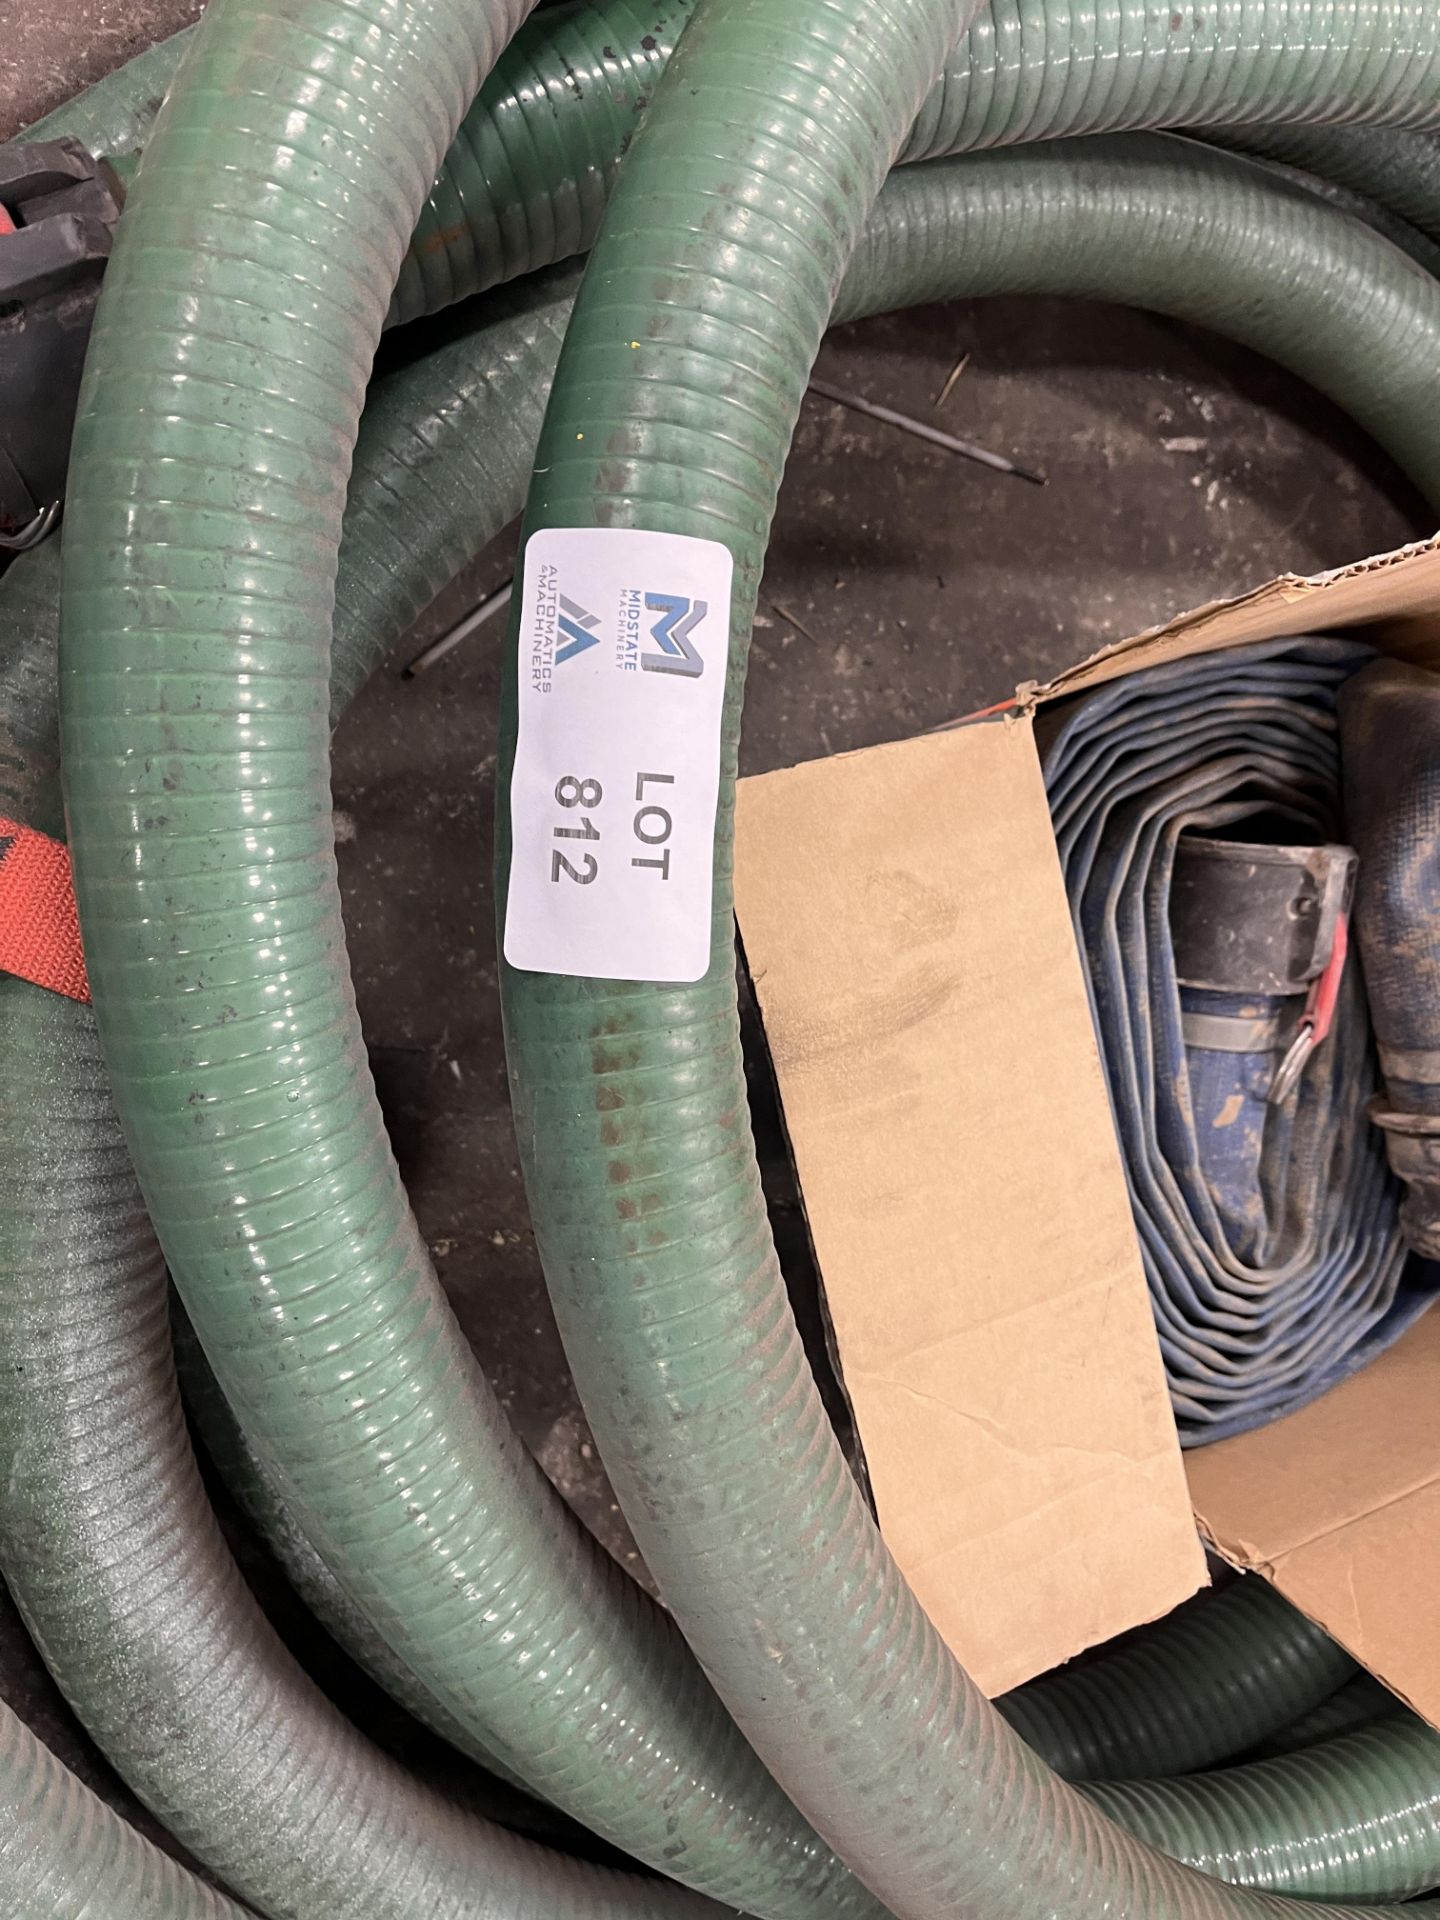 Misc Hoses - Image 3 of 3